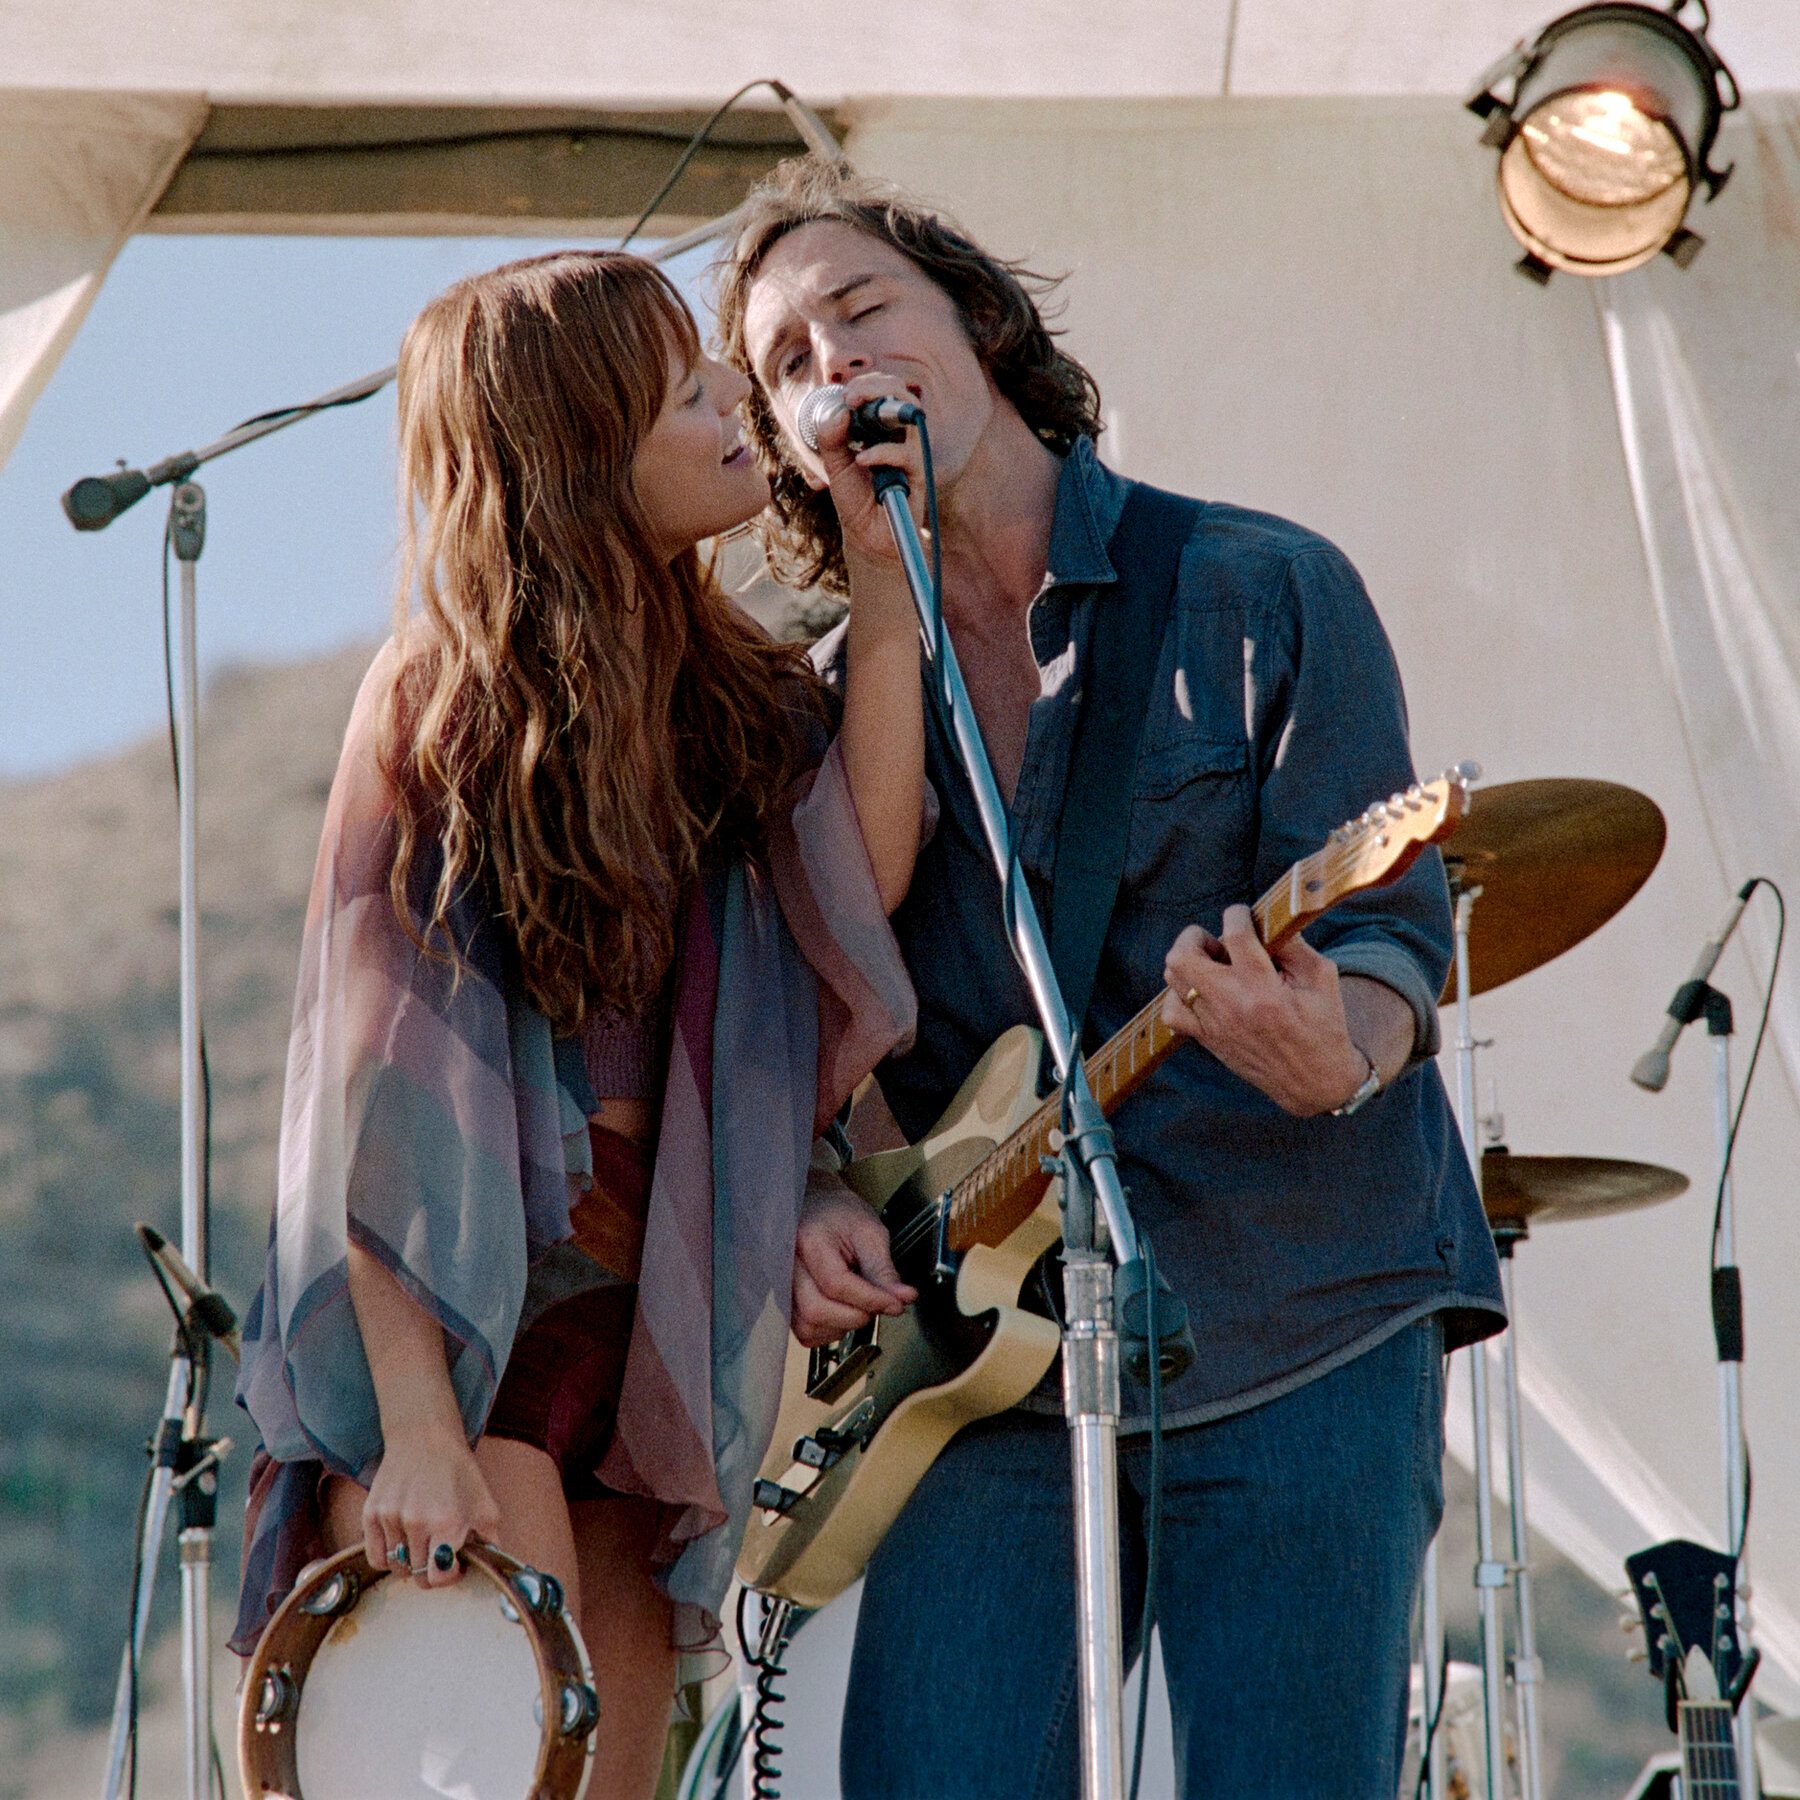 Lead singers Daisy Jones (Riley Keough) and Billy Dunne (Sam Claflin) perform together in the Amazon Prime miniseries Daisy Jones & the Six.